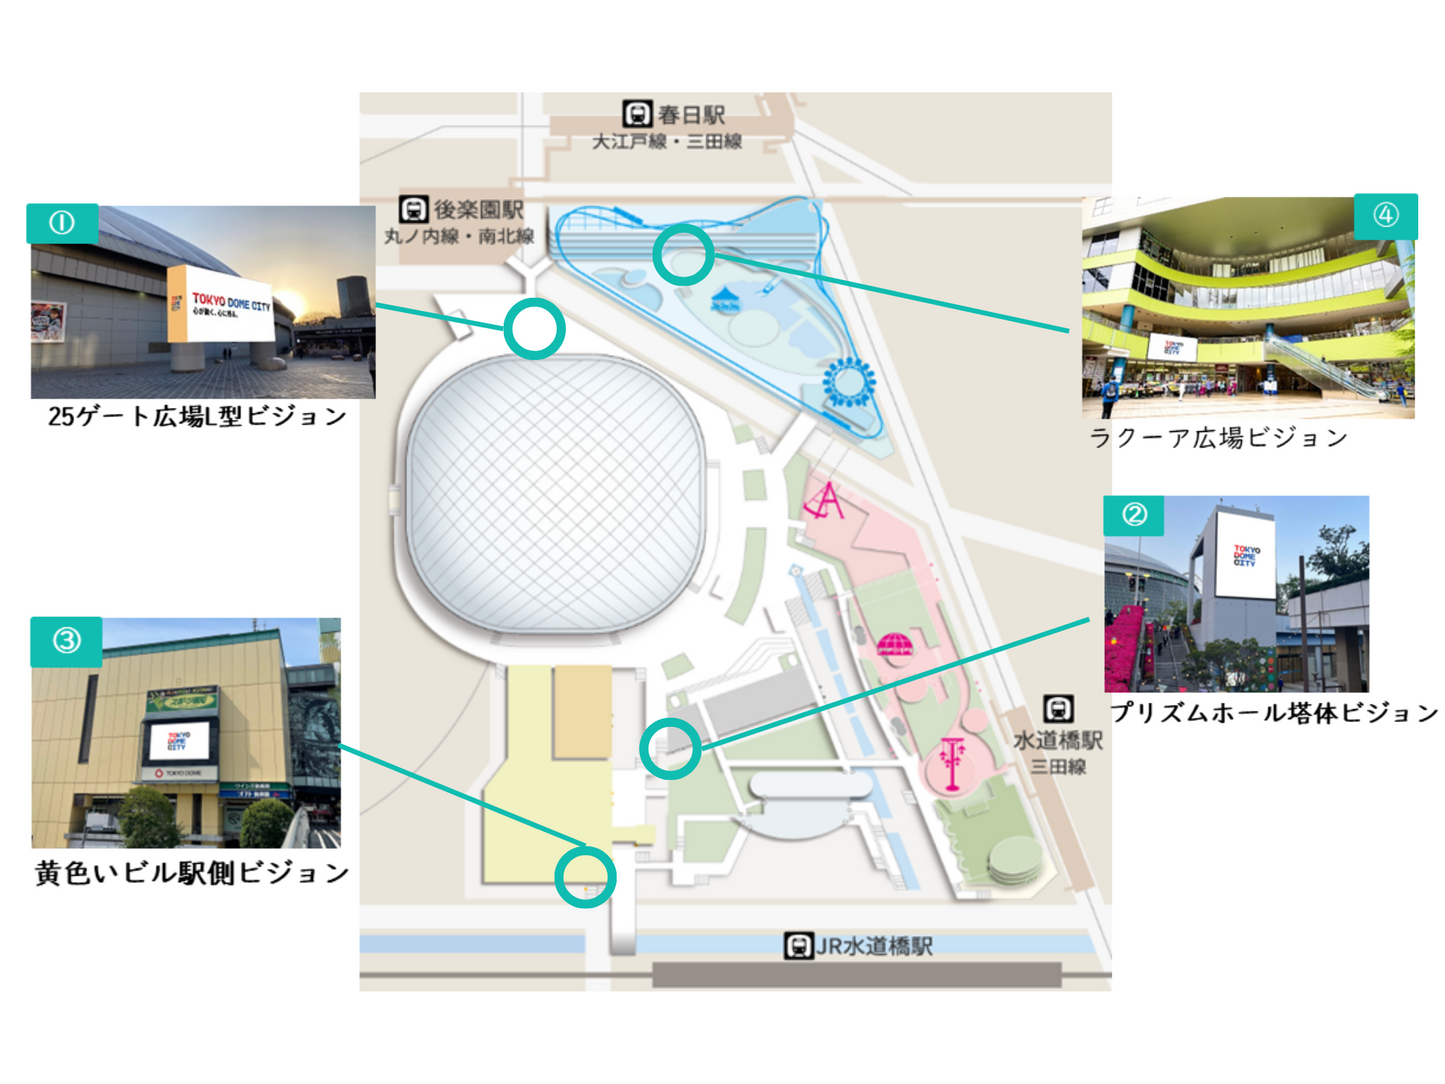 Tokyo Dome City Visions Basic Set Open LaAca Square Vision